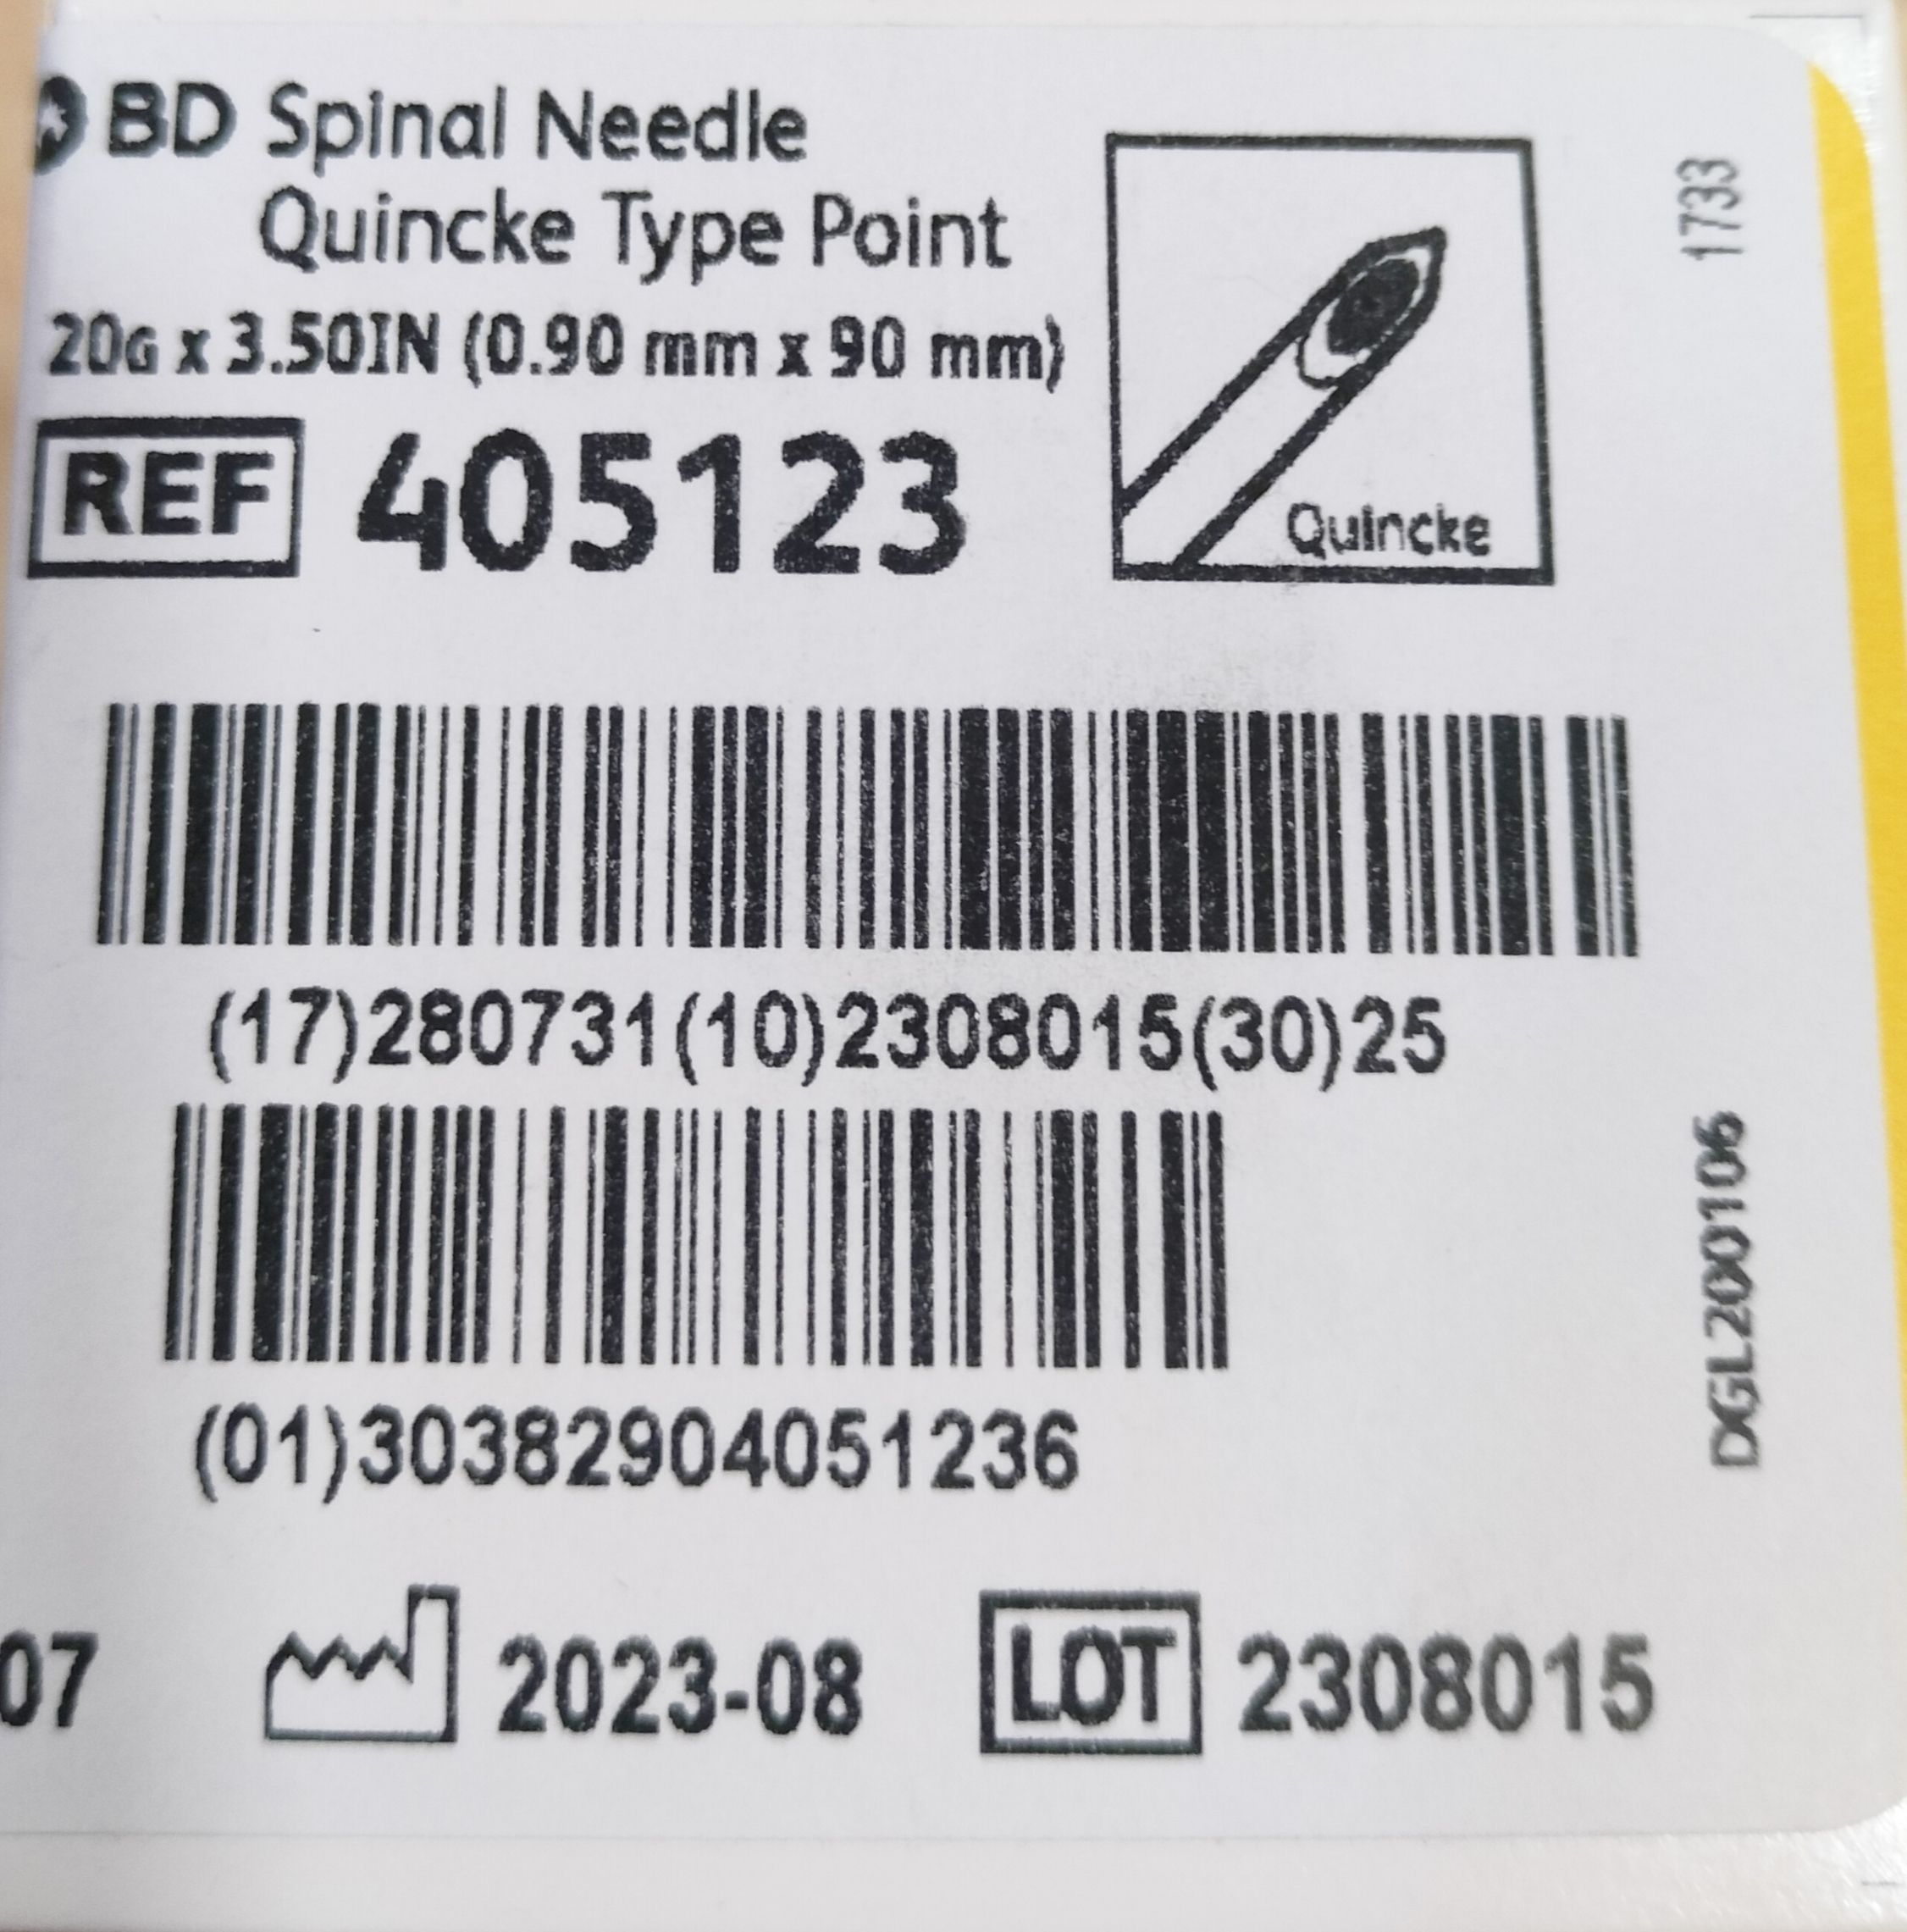 BD Spinal Needle quincke type point 26 G